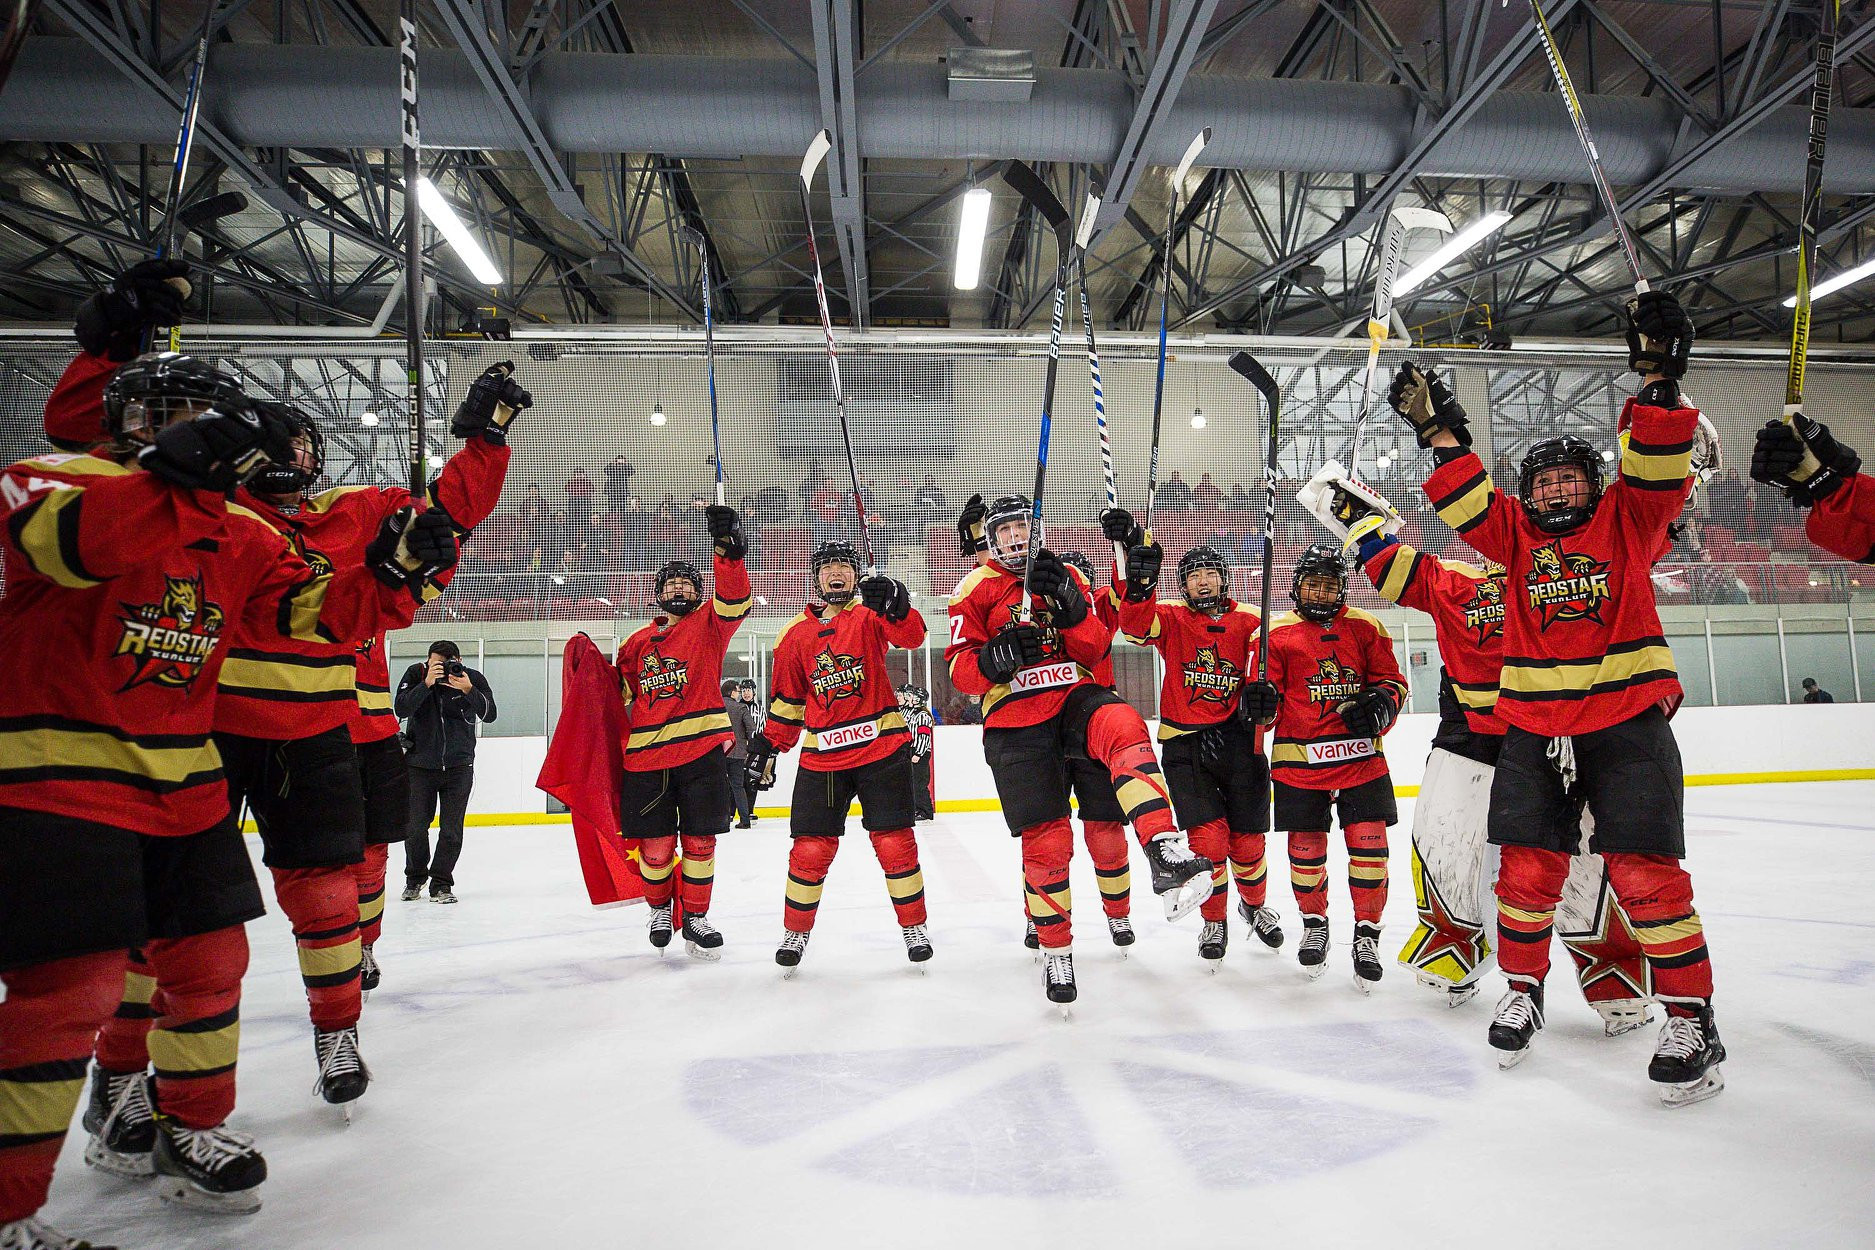 Chinese team's impressive performance in Canadian Women's Hockey League boosts Beijing 2022 hopes